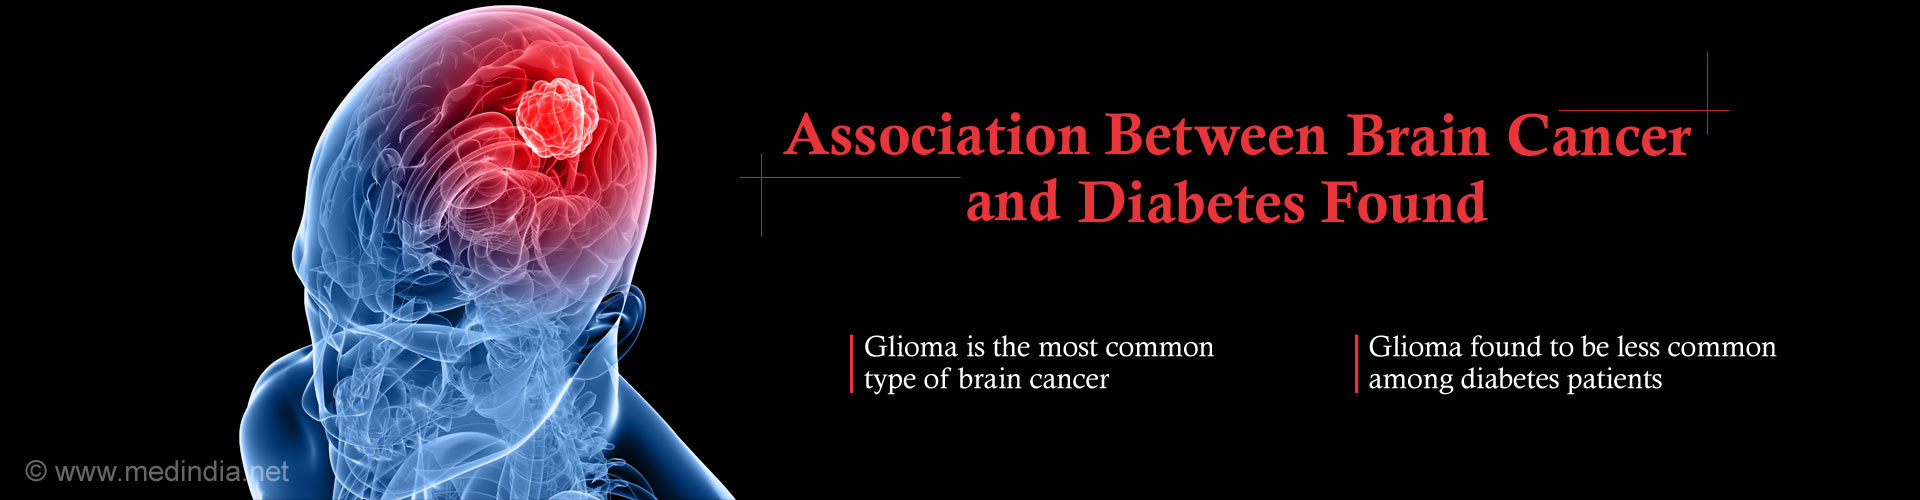 Association between brain cancer and diabetes found
- Gliome is most common type of brain cancer
- Glioma found to be less common among diabetes patients